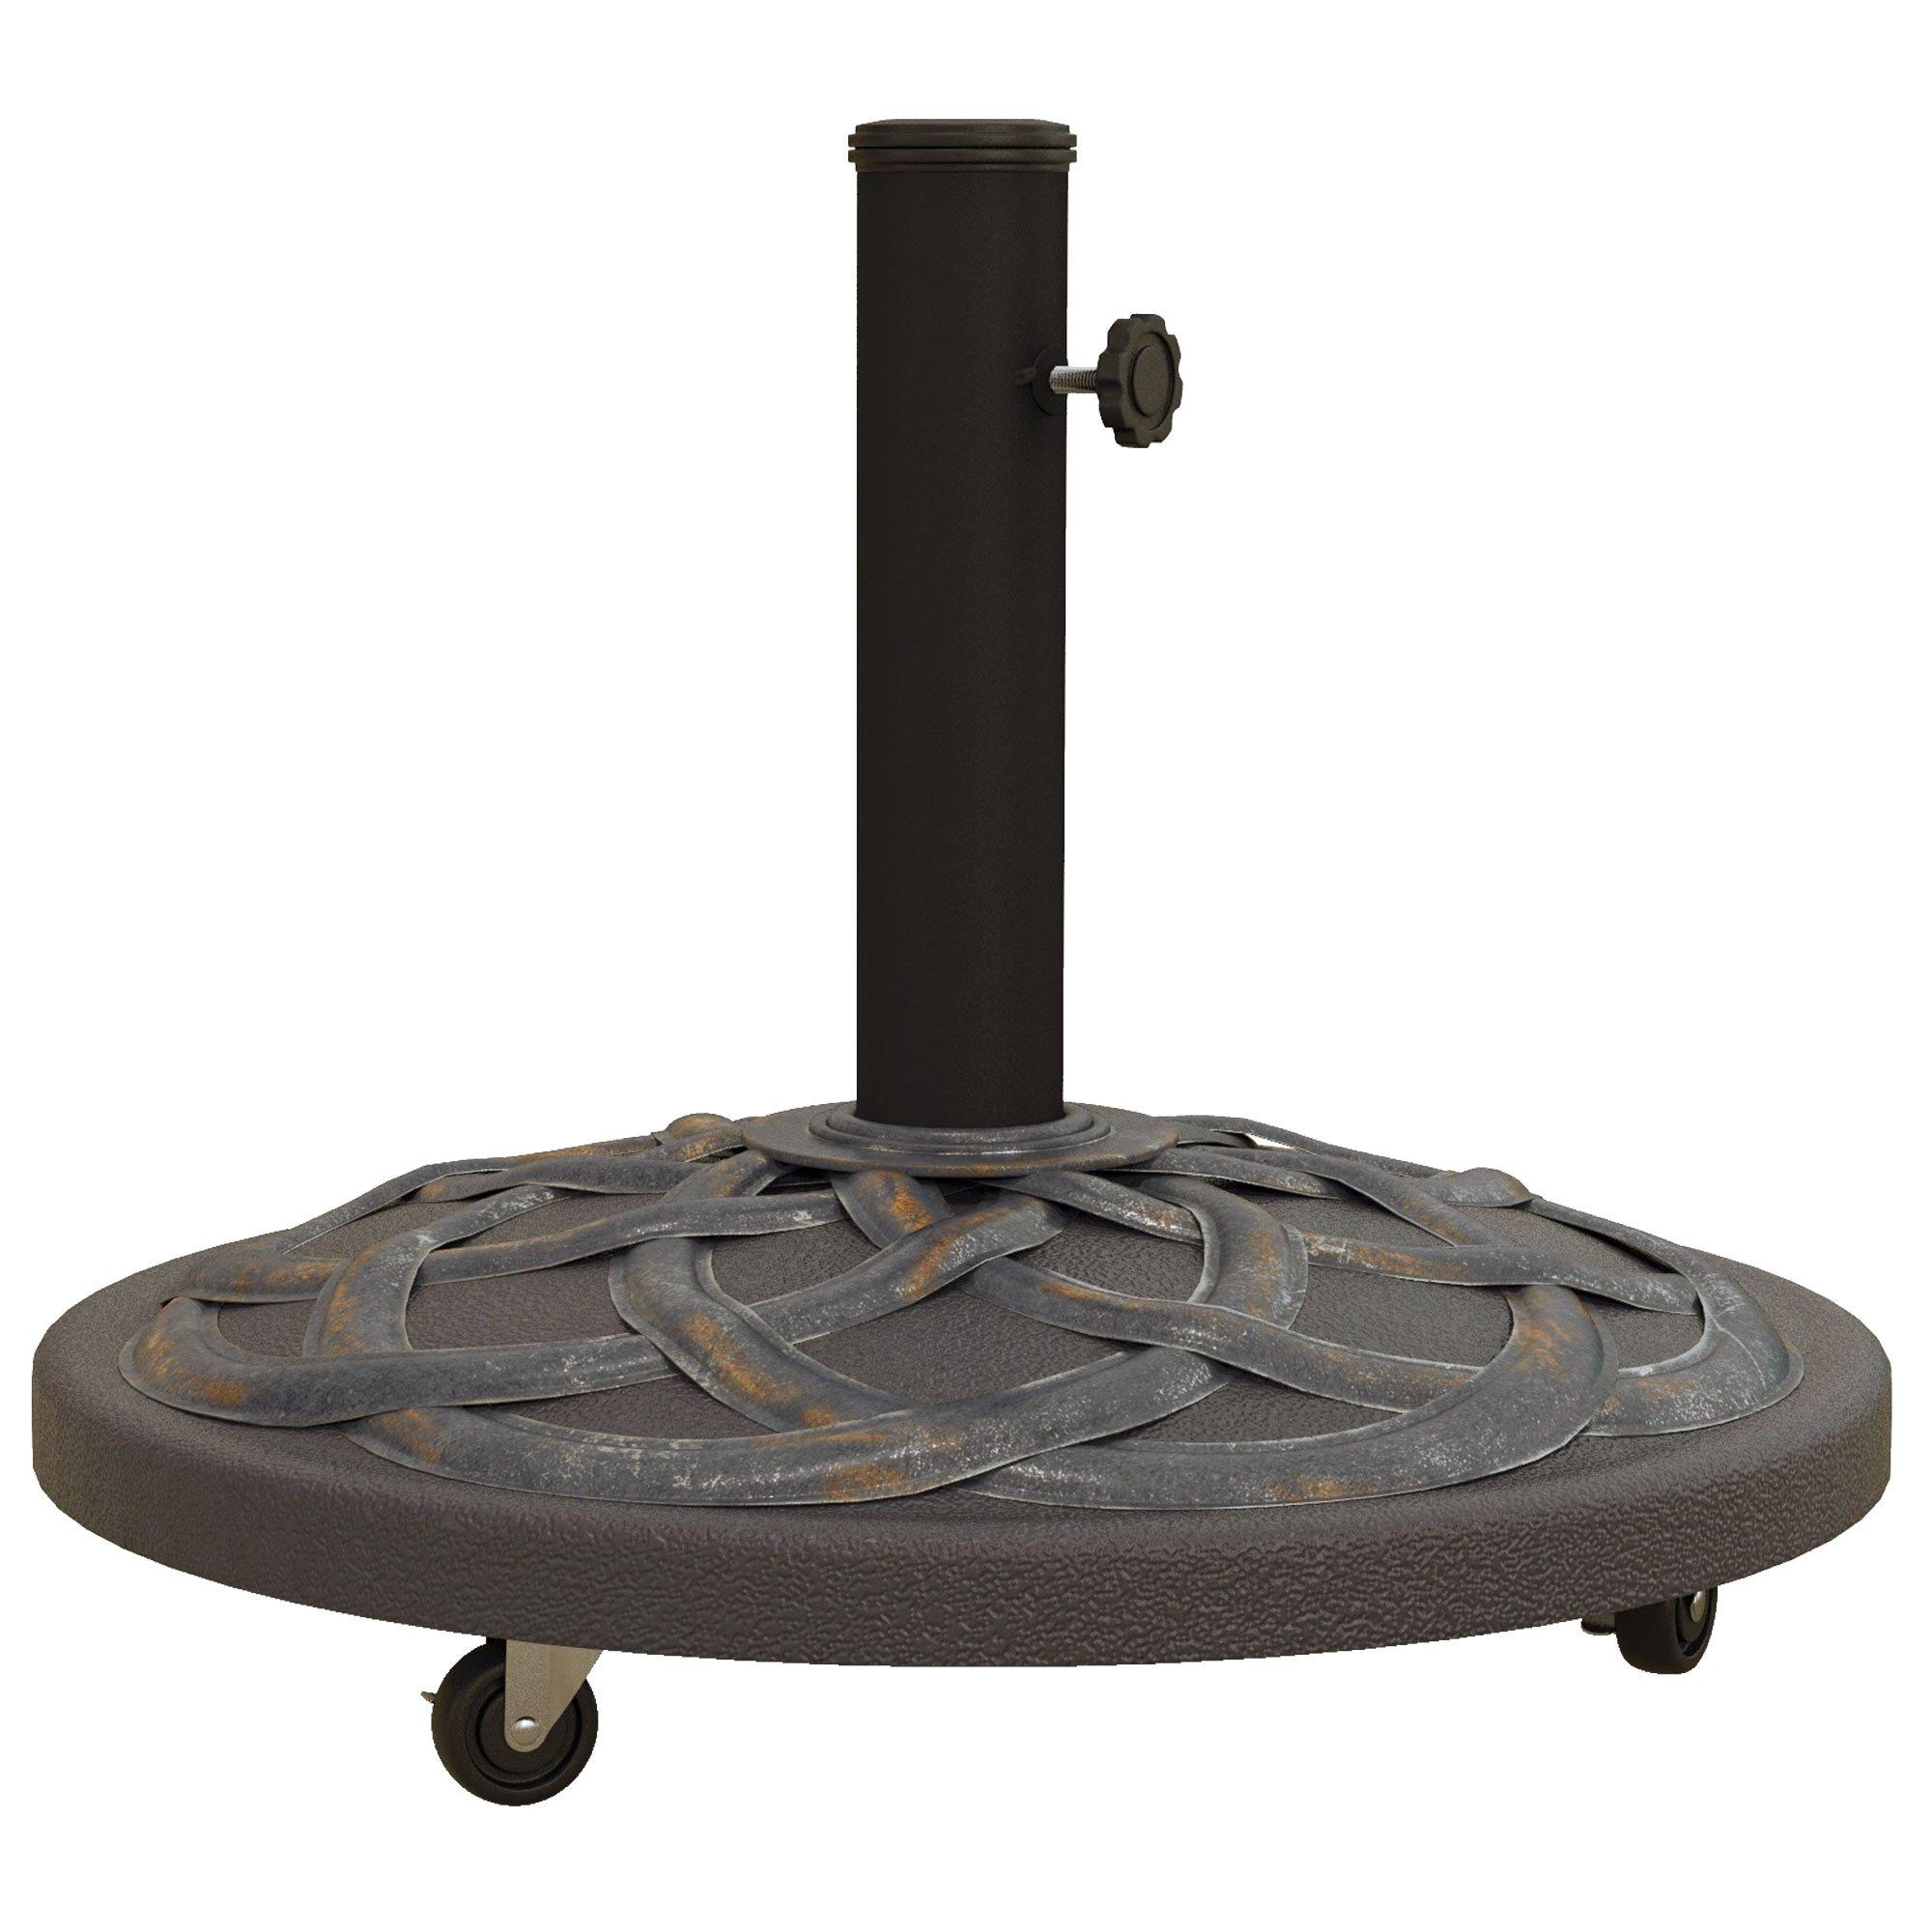 27kg Rolling Parasol Base with Wheels Heavy Duty Umbrella Stand Bronze Tone